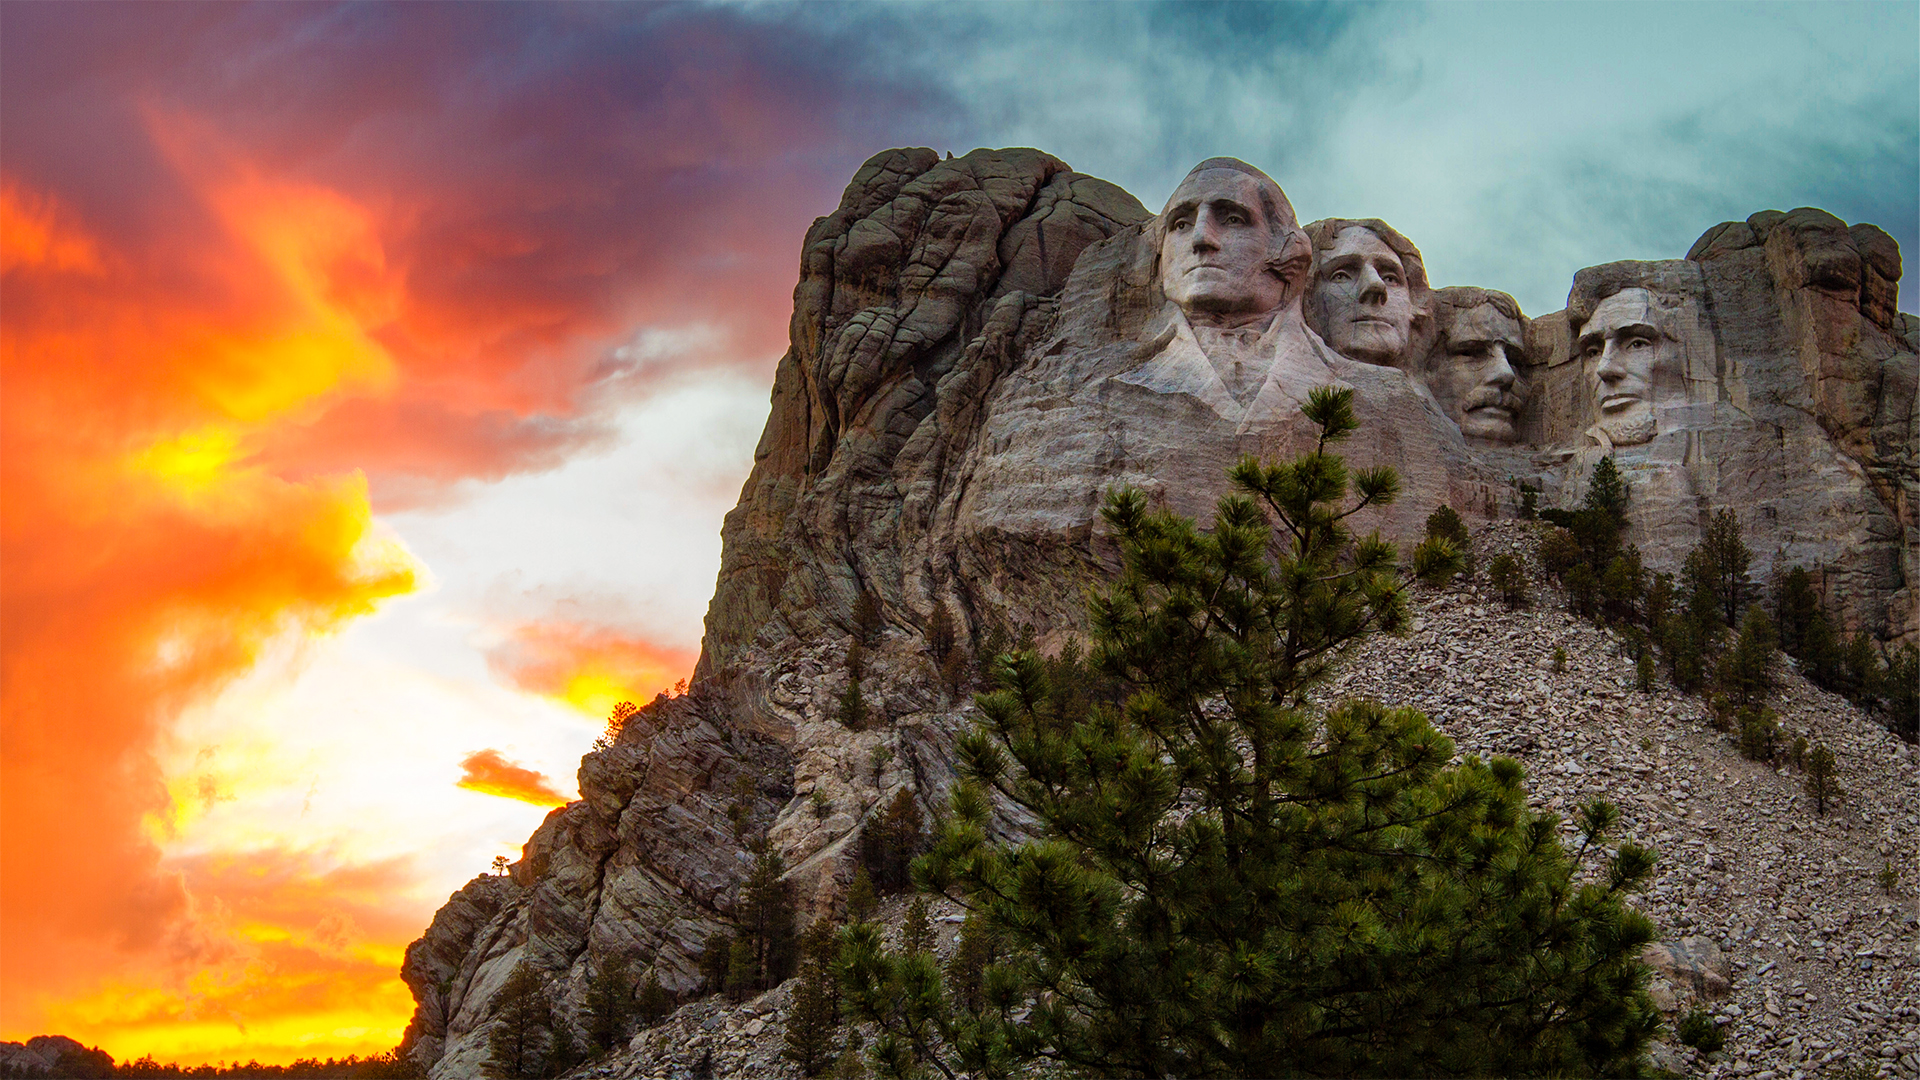 Photograph of Mount Rushmore with the sun behind it